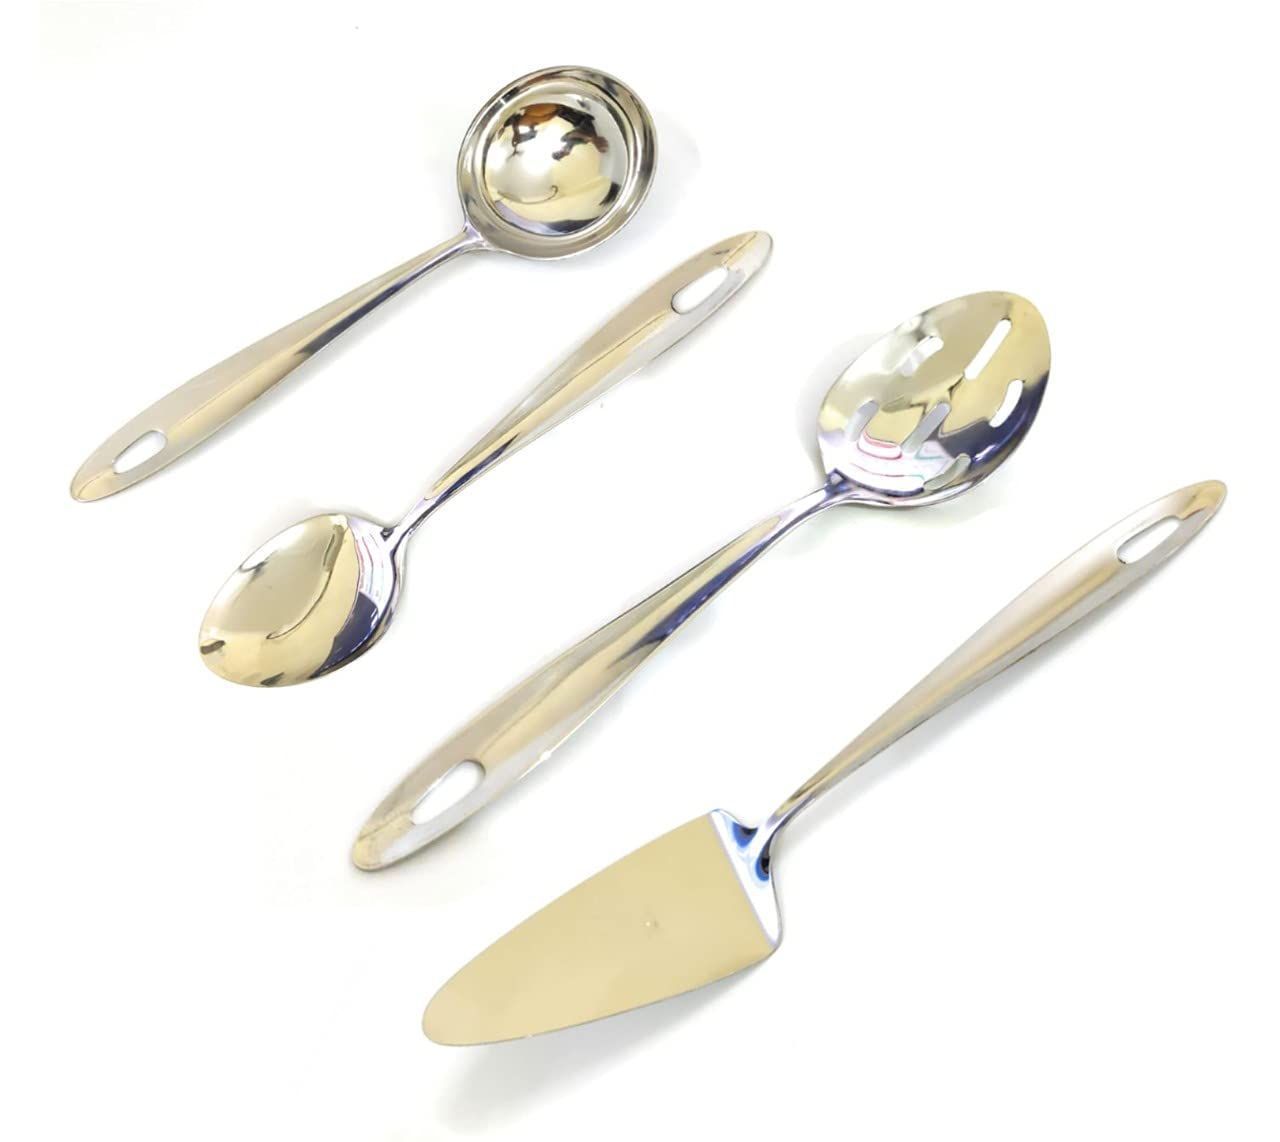 Vessel Crew Stainless Steel Serving & Cooking Spoon Set, Karchi, Pony, Palta & Dosa Palta (Pack of 4)